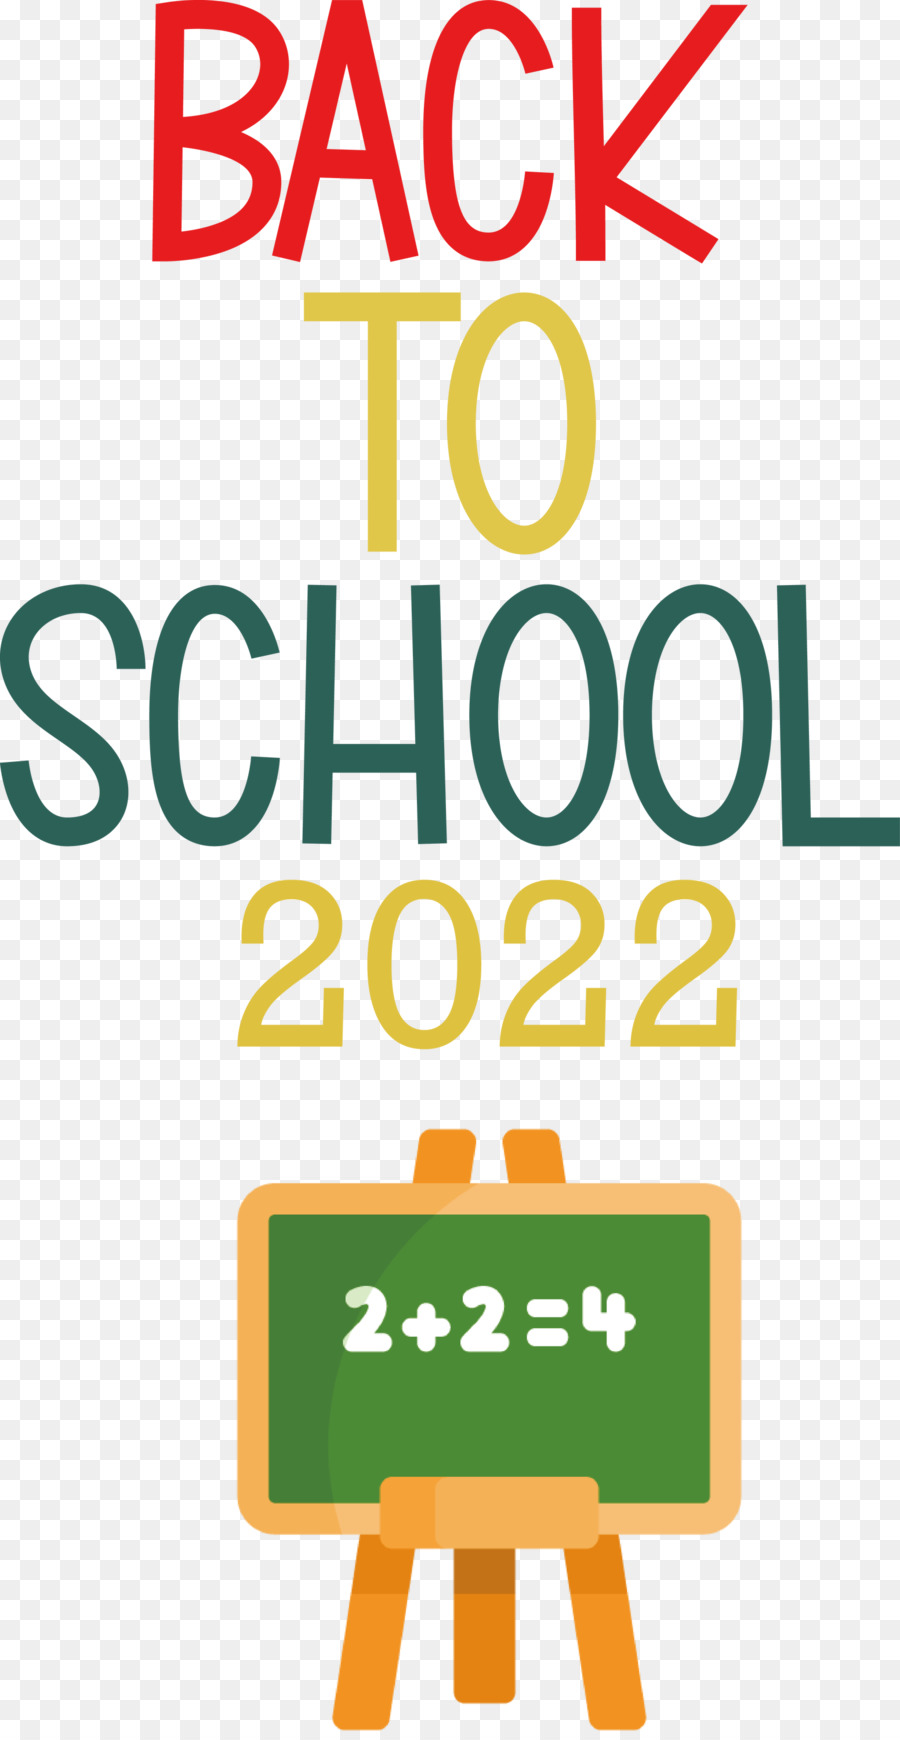 Back to school 2022 Education